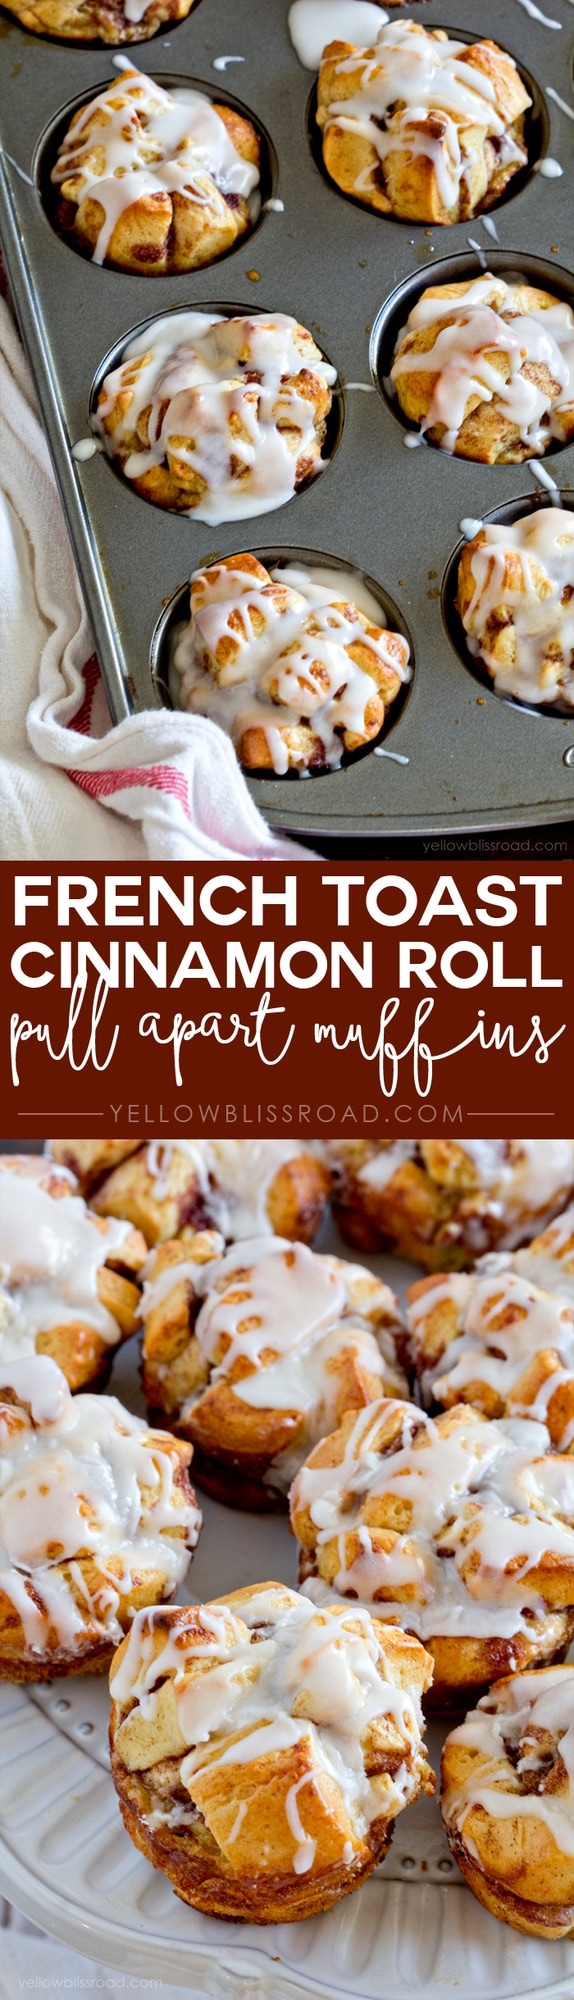 French Toast Cinnamon Roll Pull Apart Muffins